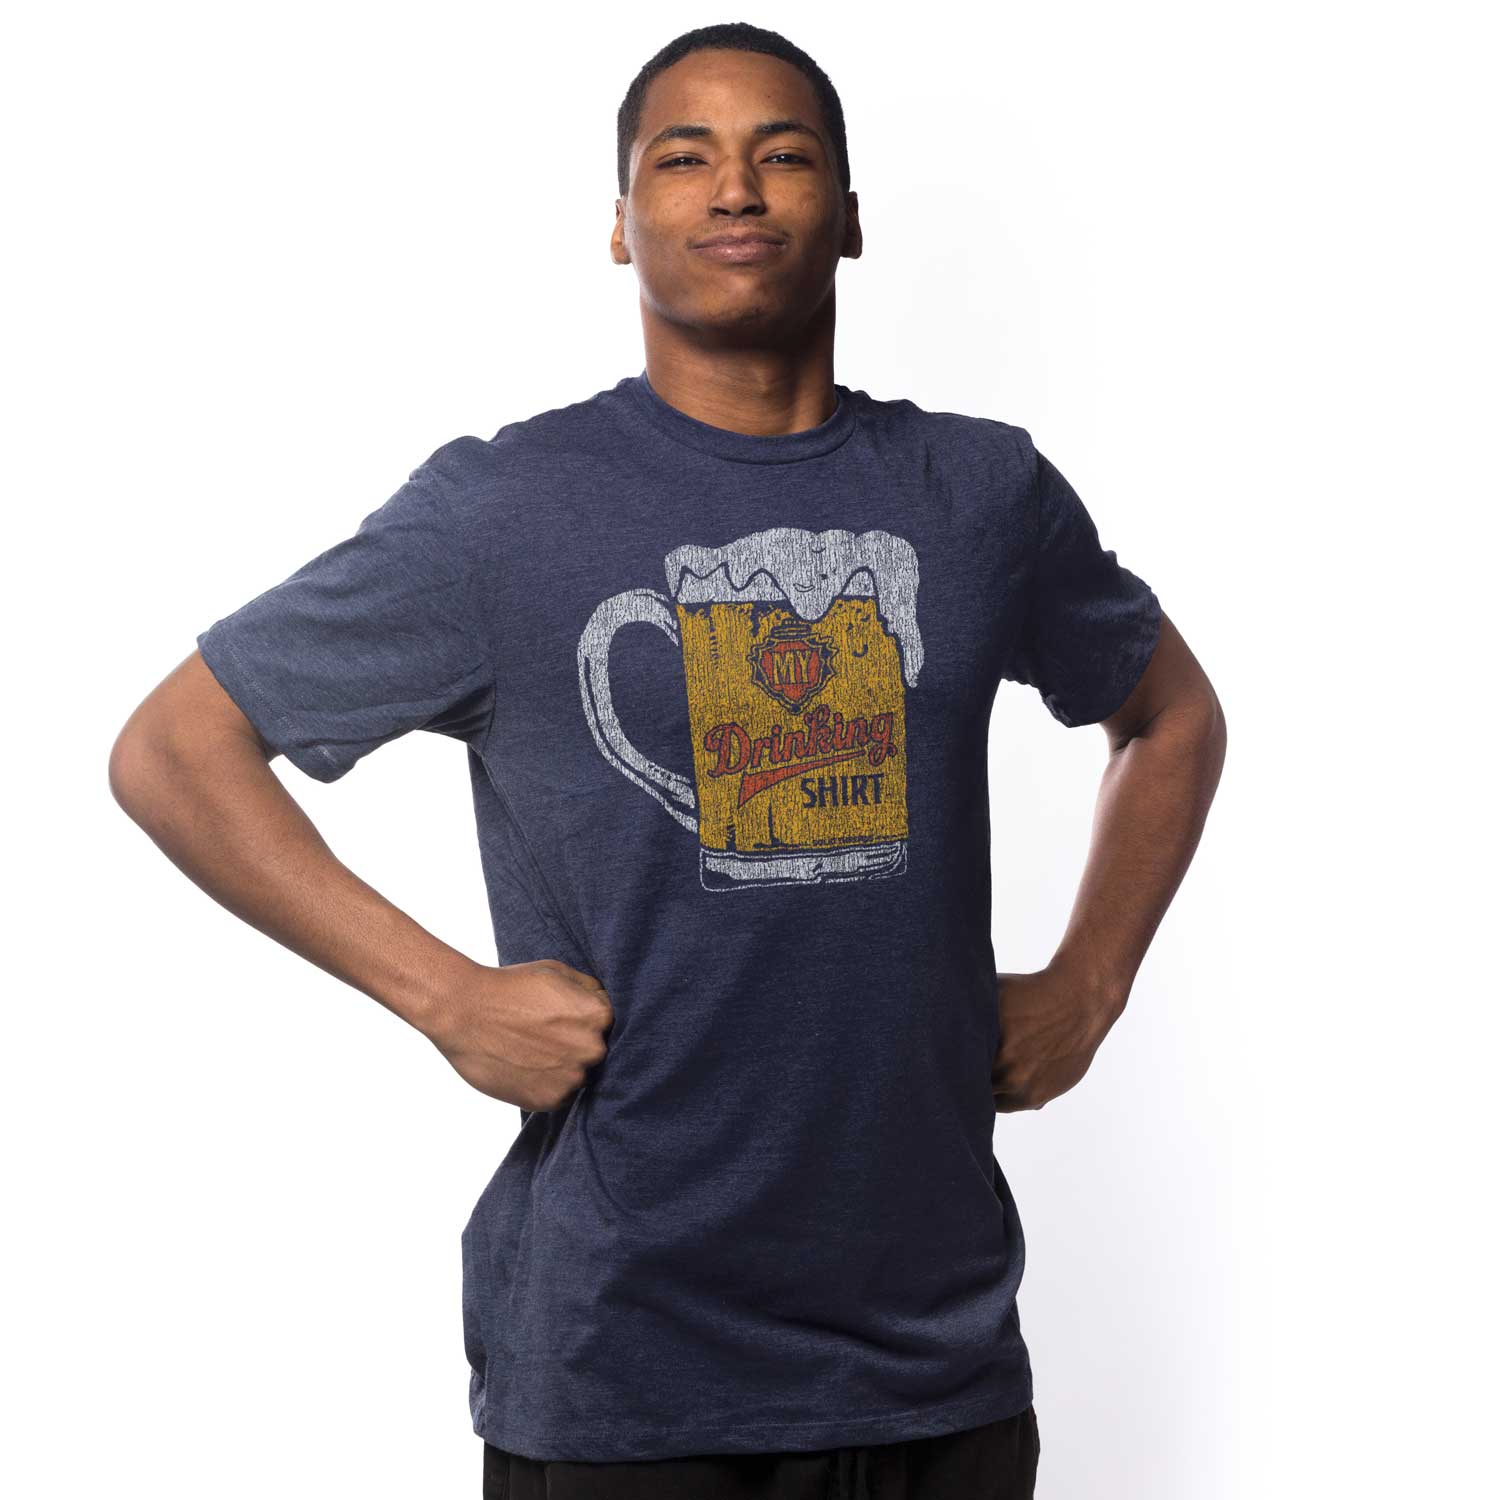 Men's My Drinking Shirt Retro Drinking Beer Graphic Tee | Funny Pint Glass T-Shirt | Solid Threads